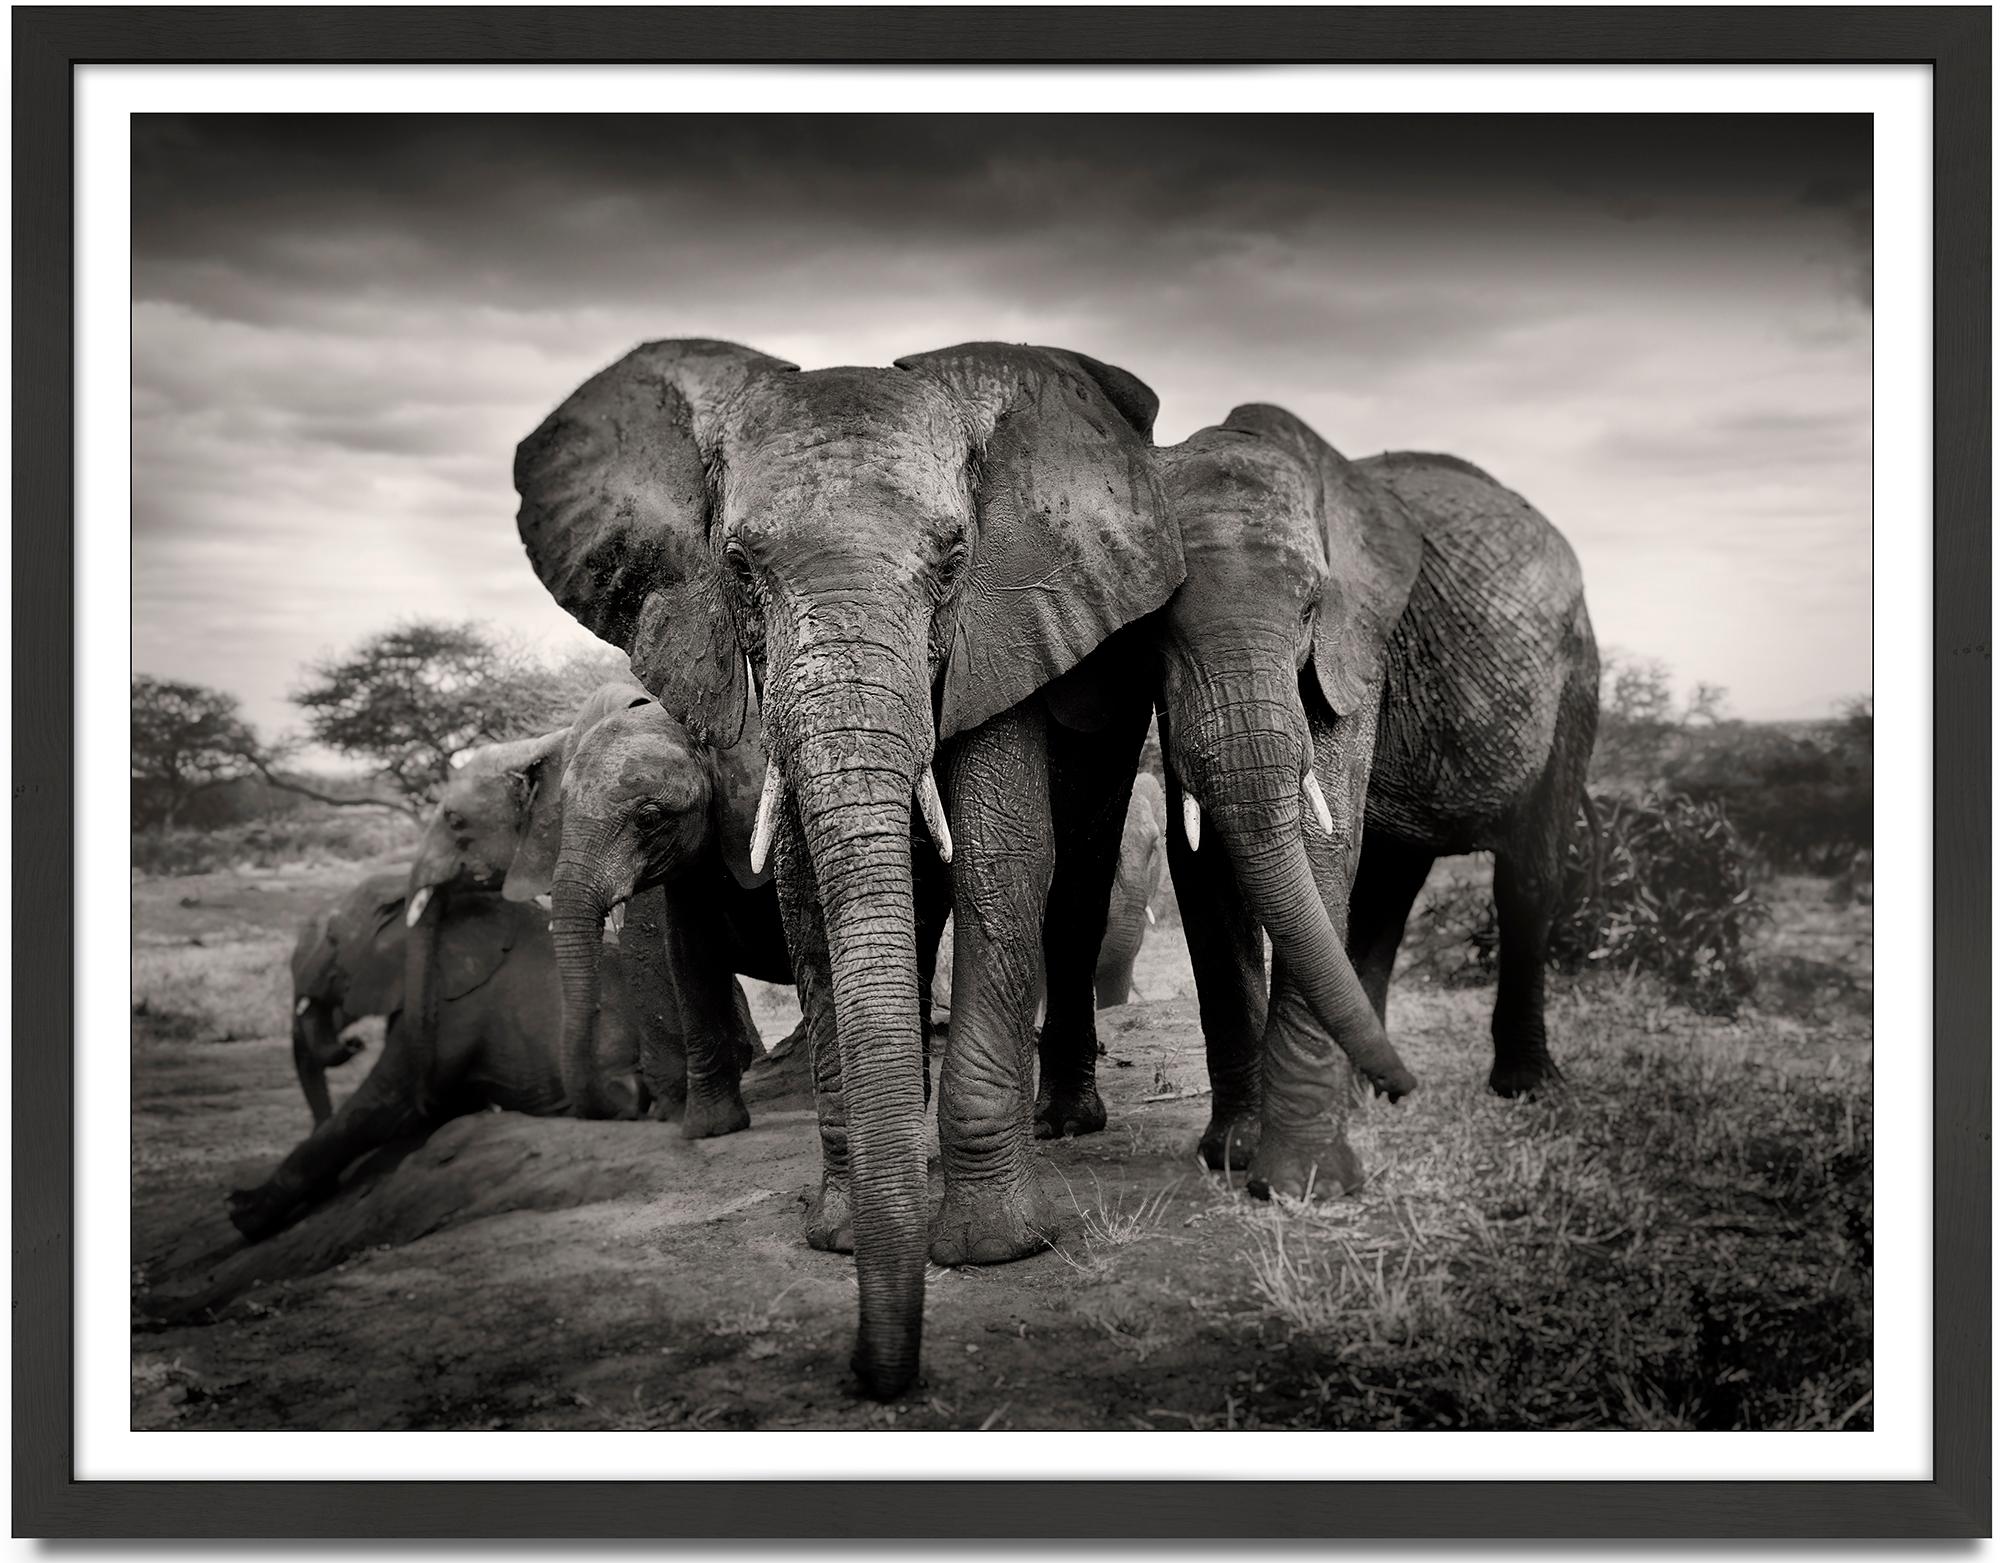 The magnificent Seven - Platinum, animal, elephant, black and white photography - Photograph by Joachim Schmeisser